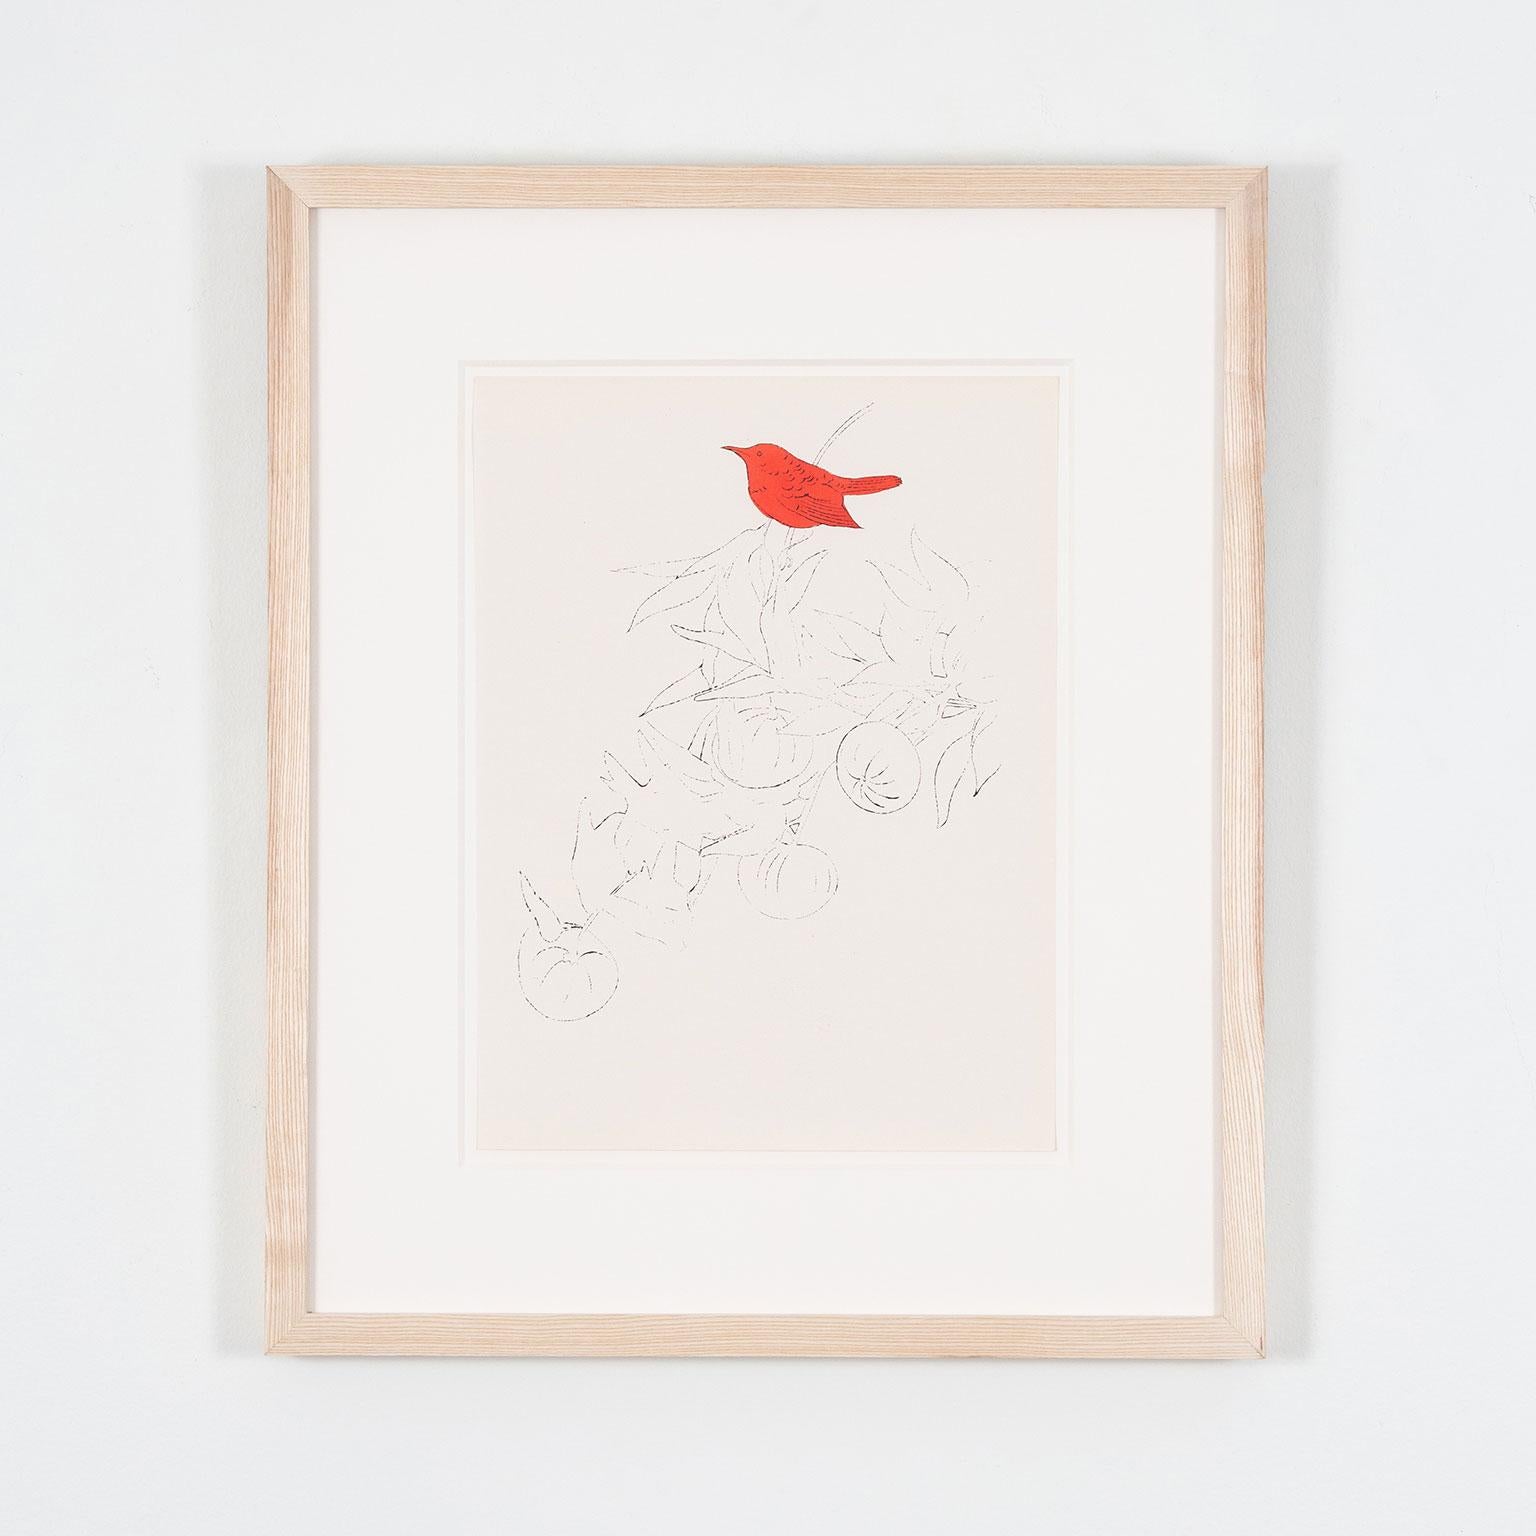 Bird on a Fruit Branch, Offset lithograph with hand coloring in watercolor - Print by Andy Warhol